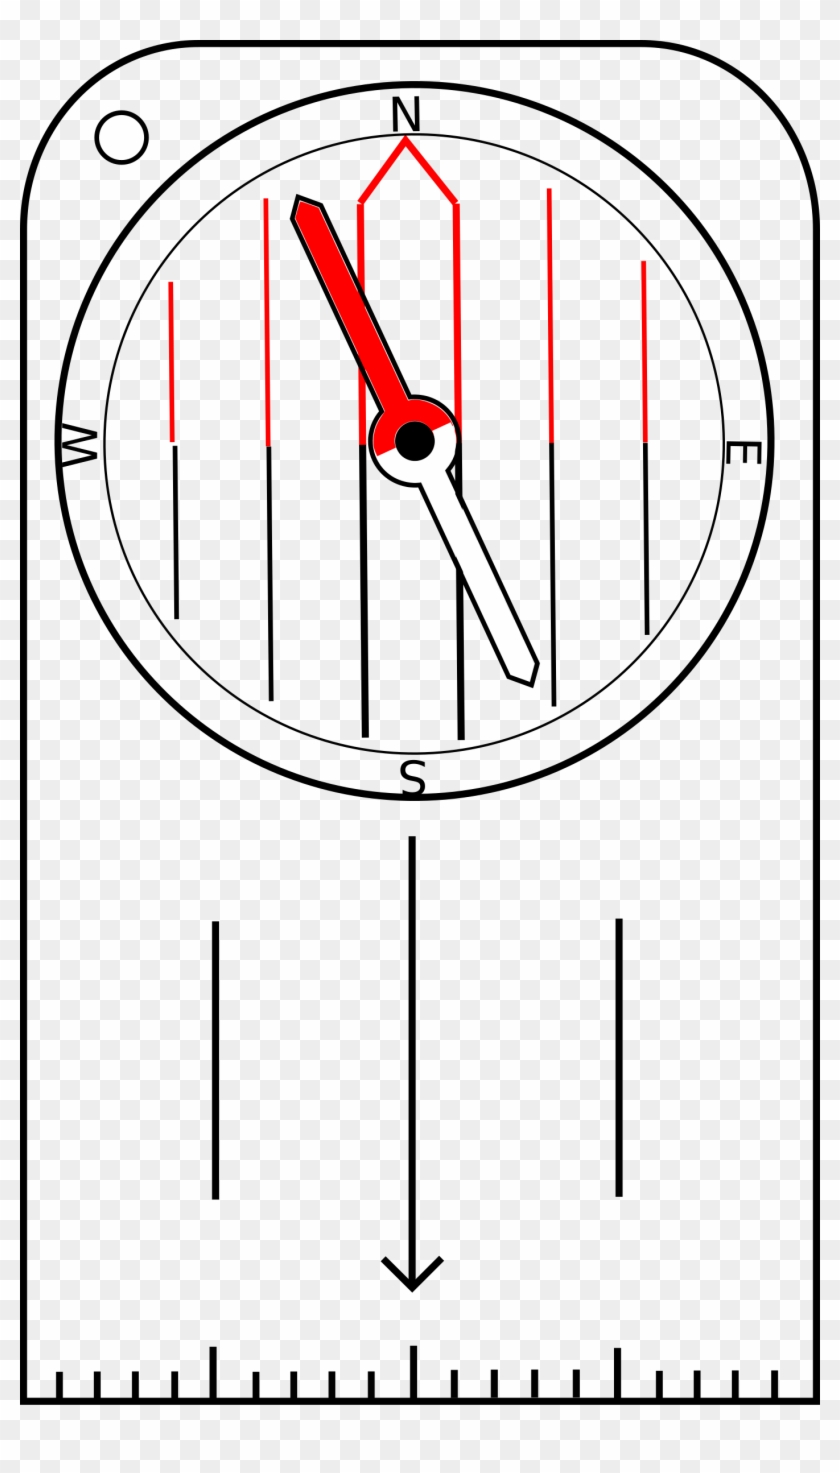 Clipart Orienteering Compass With Rotatable Housing - Orienteering Compass Clipart #1044974